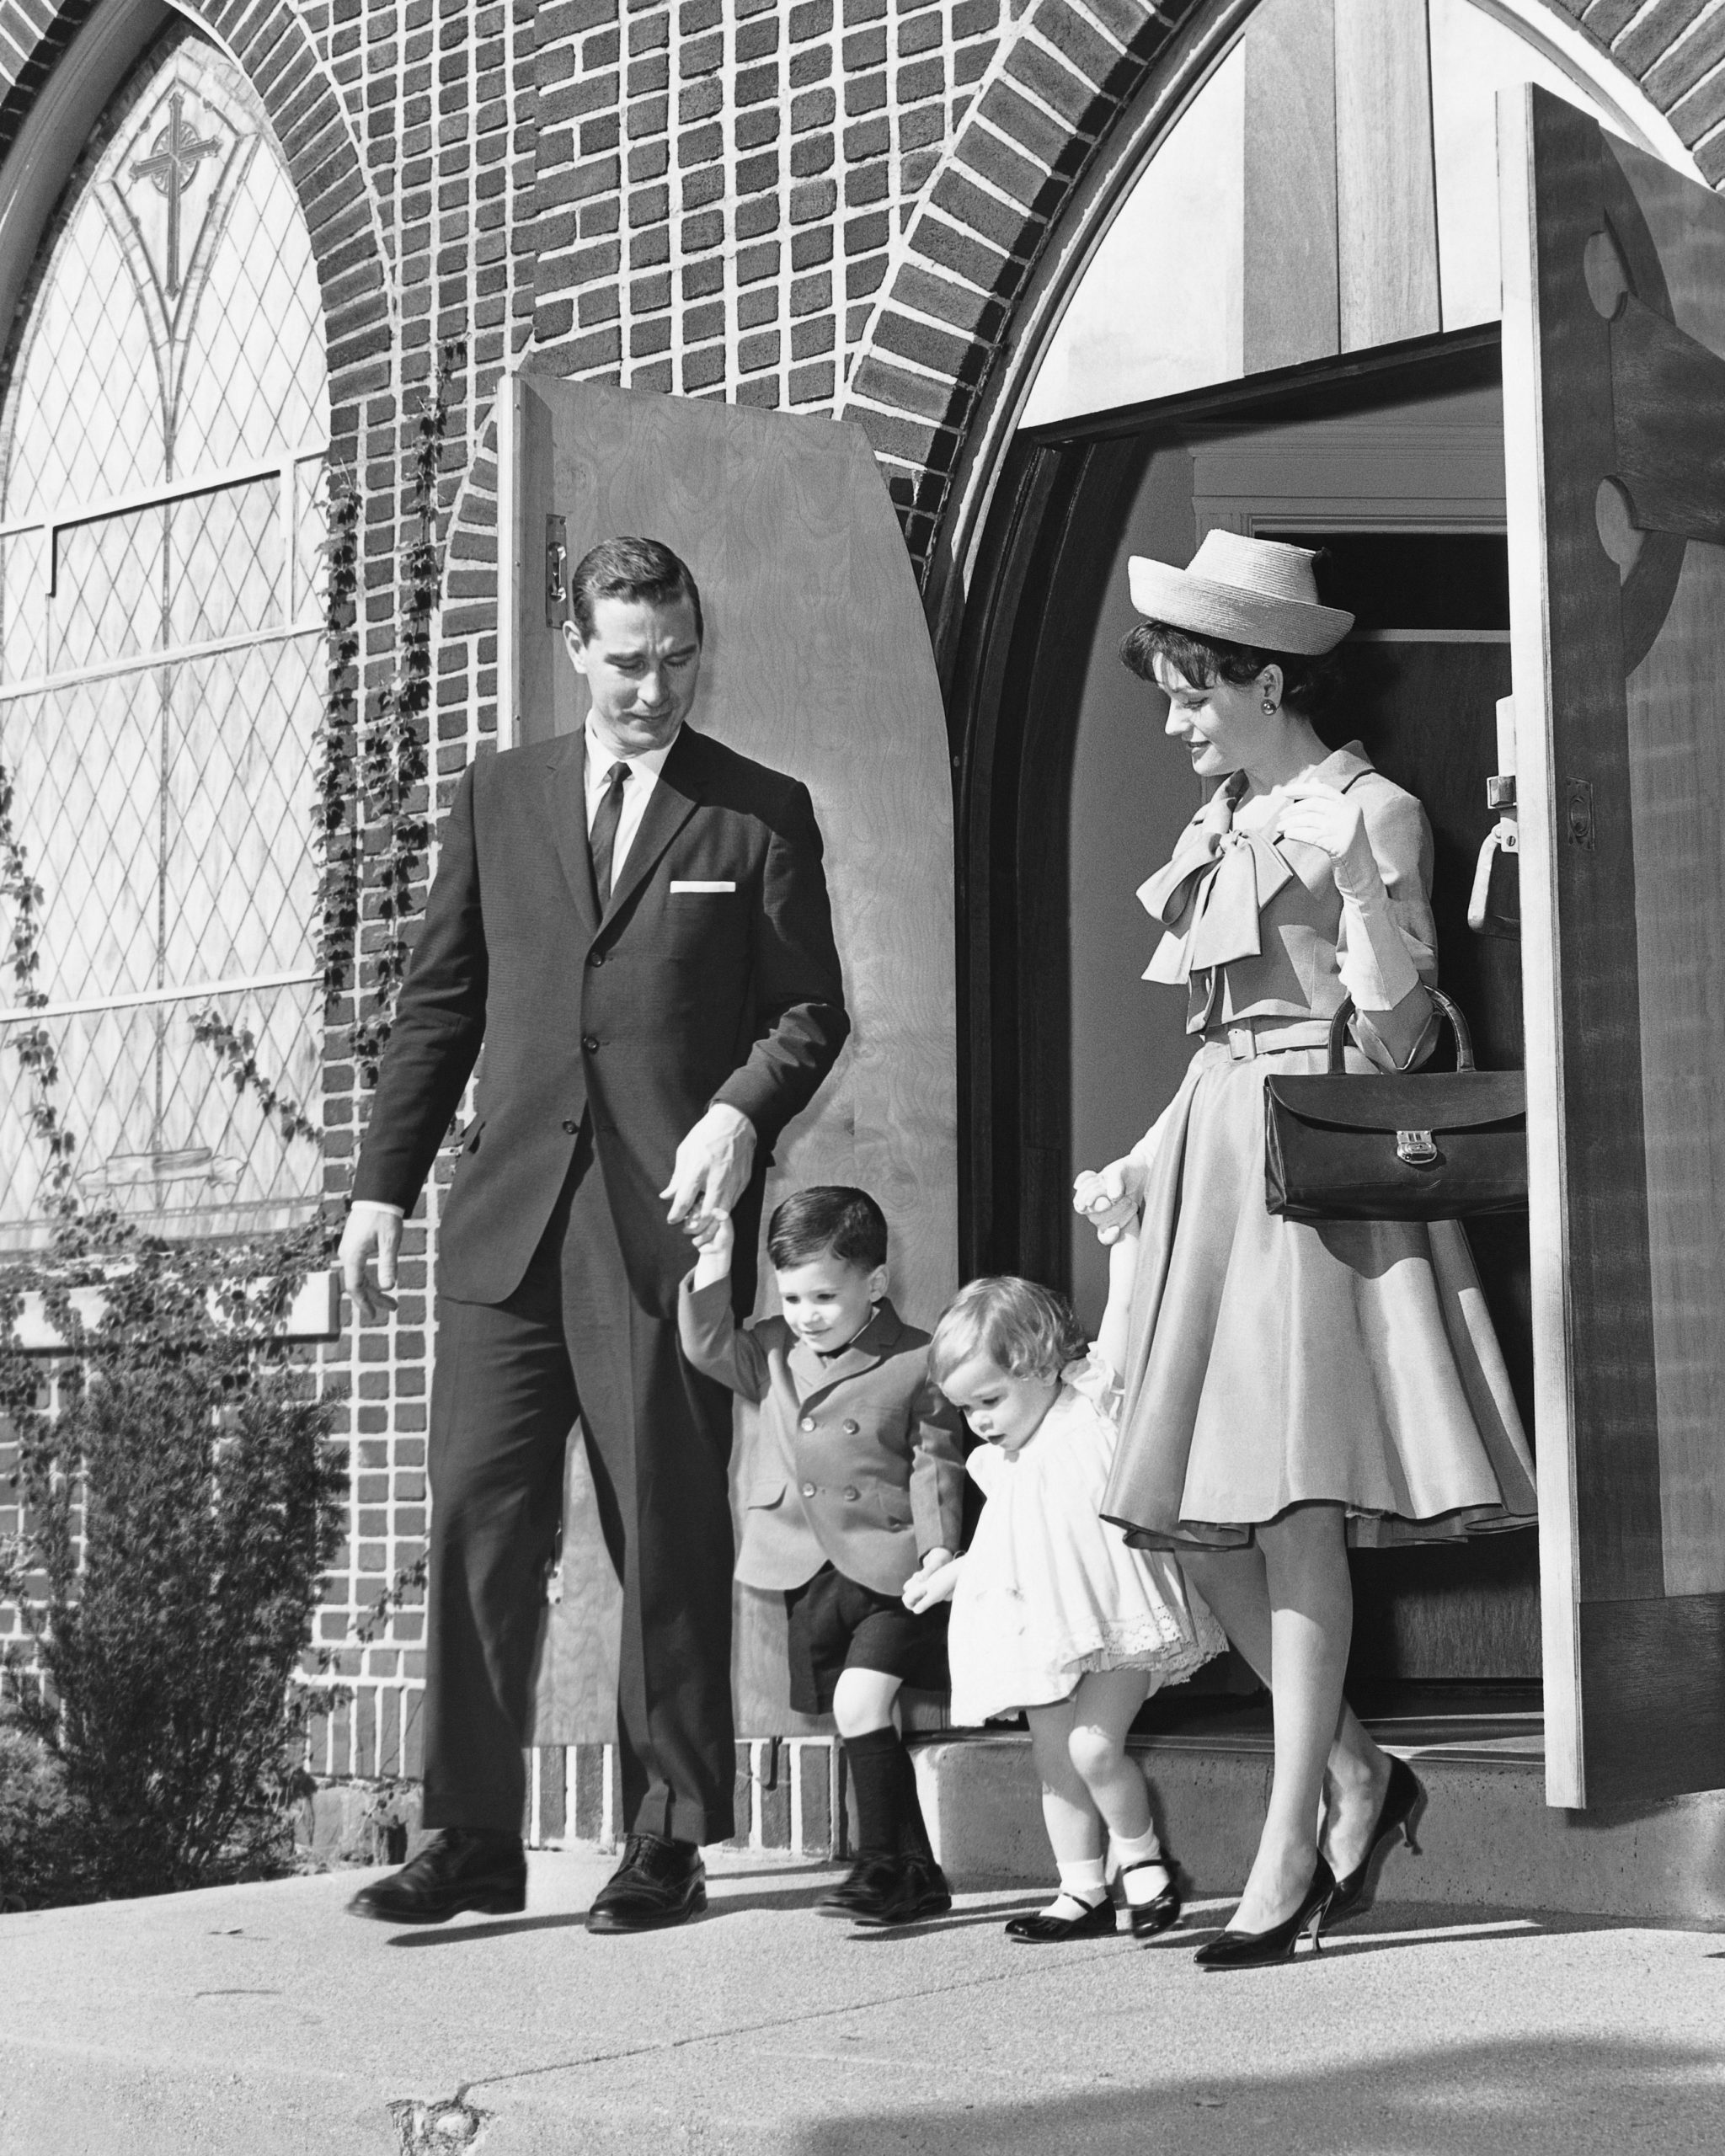 Black and white image of well dressed white married couple with young boy and girl exit church in 1950s.